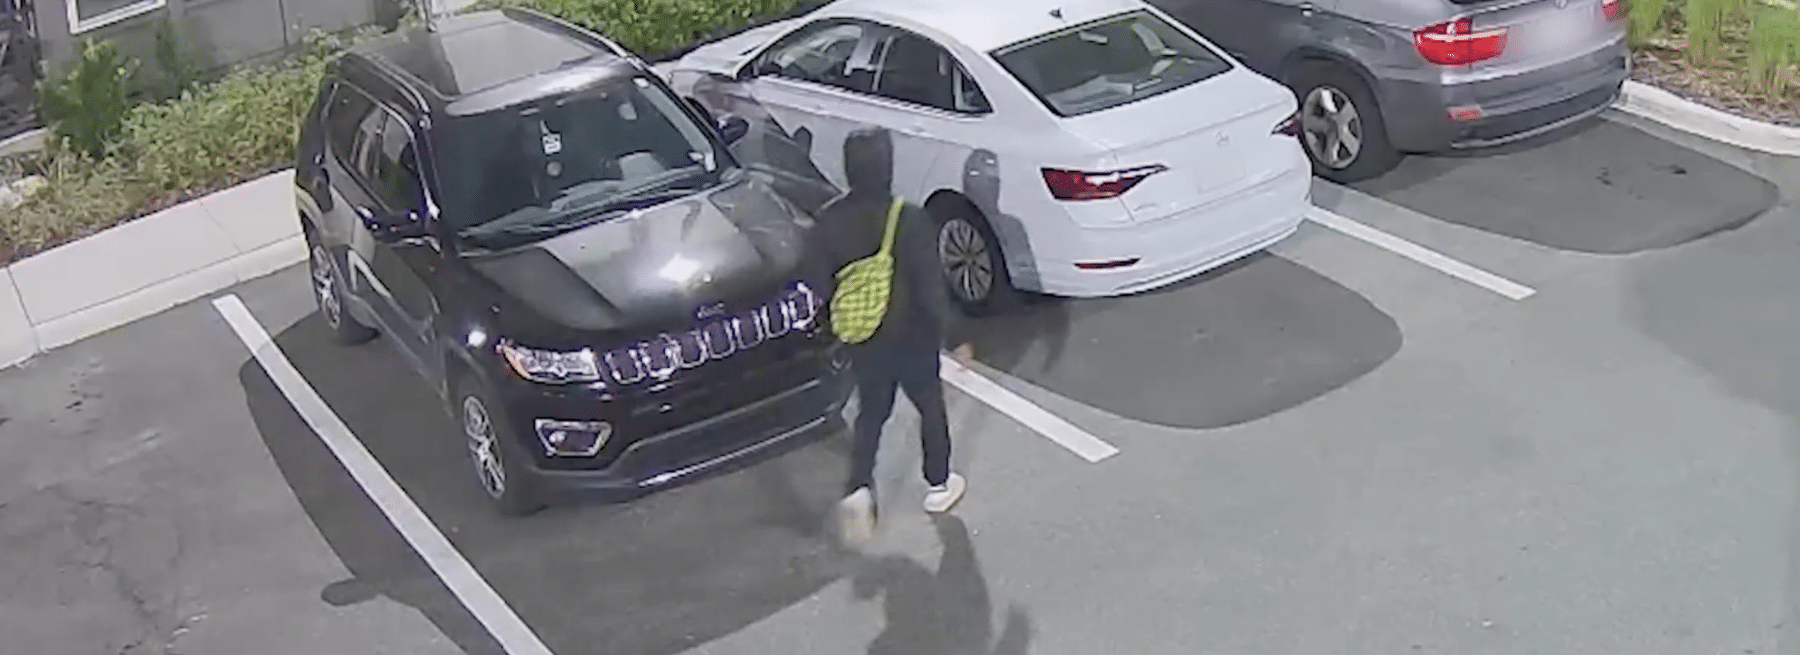 Man attempting to break into cars in Florida apartment parking garage